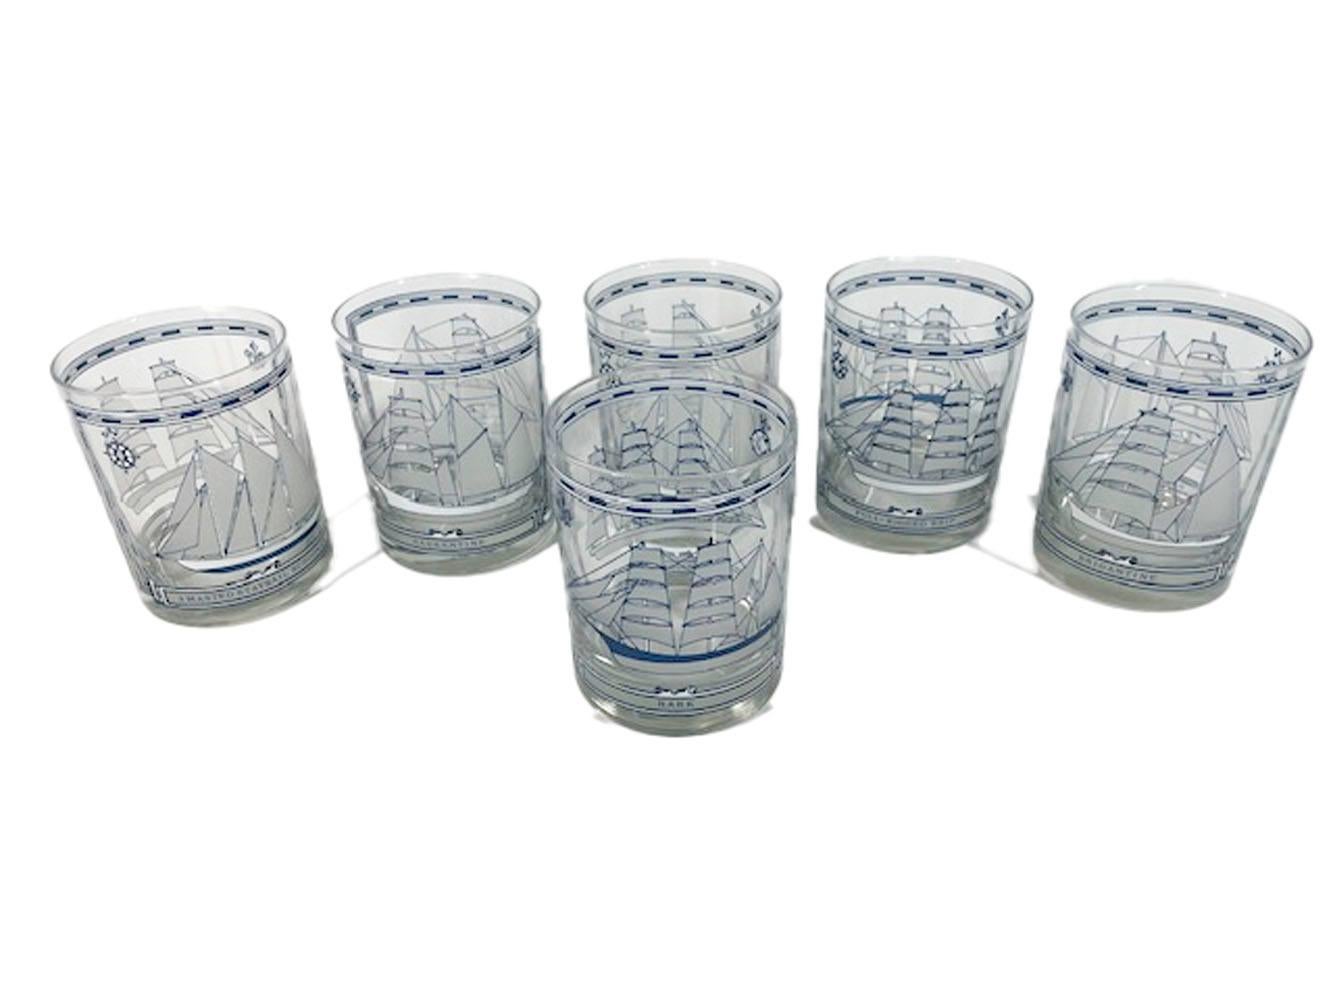 Six mid-century rocks glasses designed by Georges Briard, in blue and white enamel. Each glass with two sailing ships of different types with the type named below the image. Included are bark, full-rigged ship, 3 masted staysail schooner, brig,